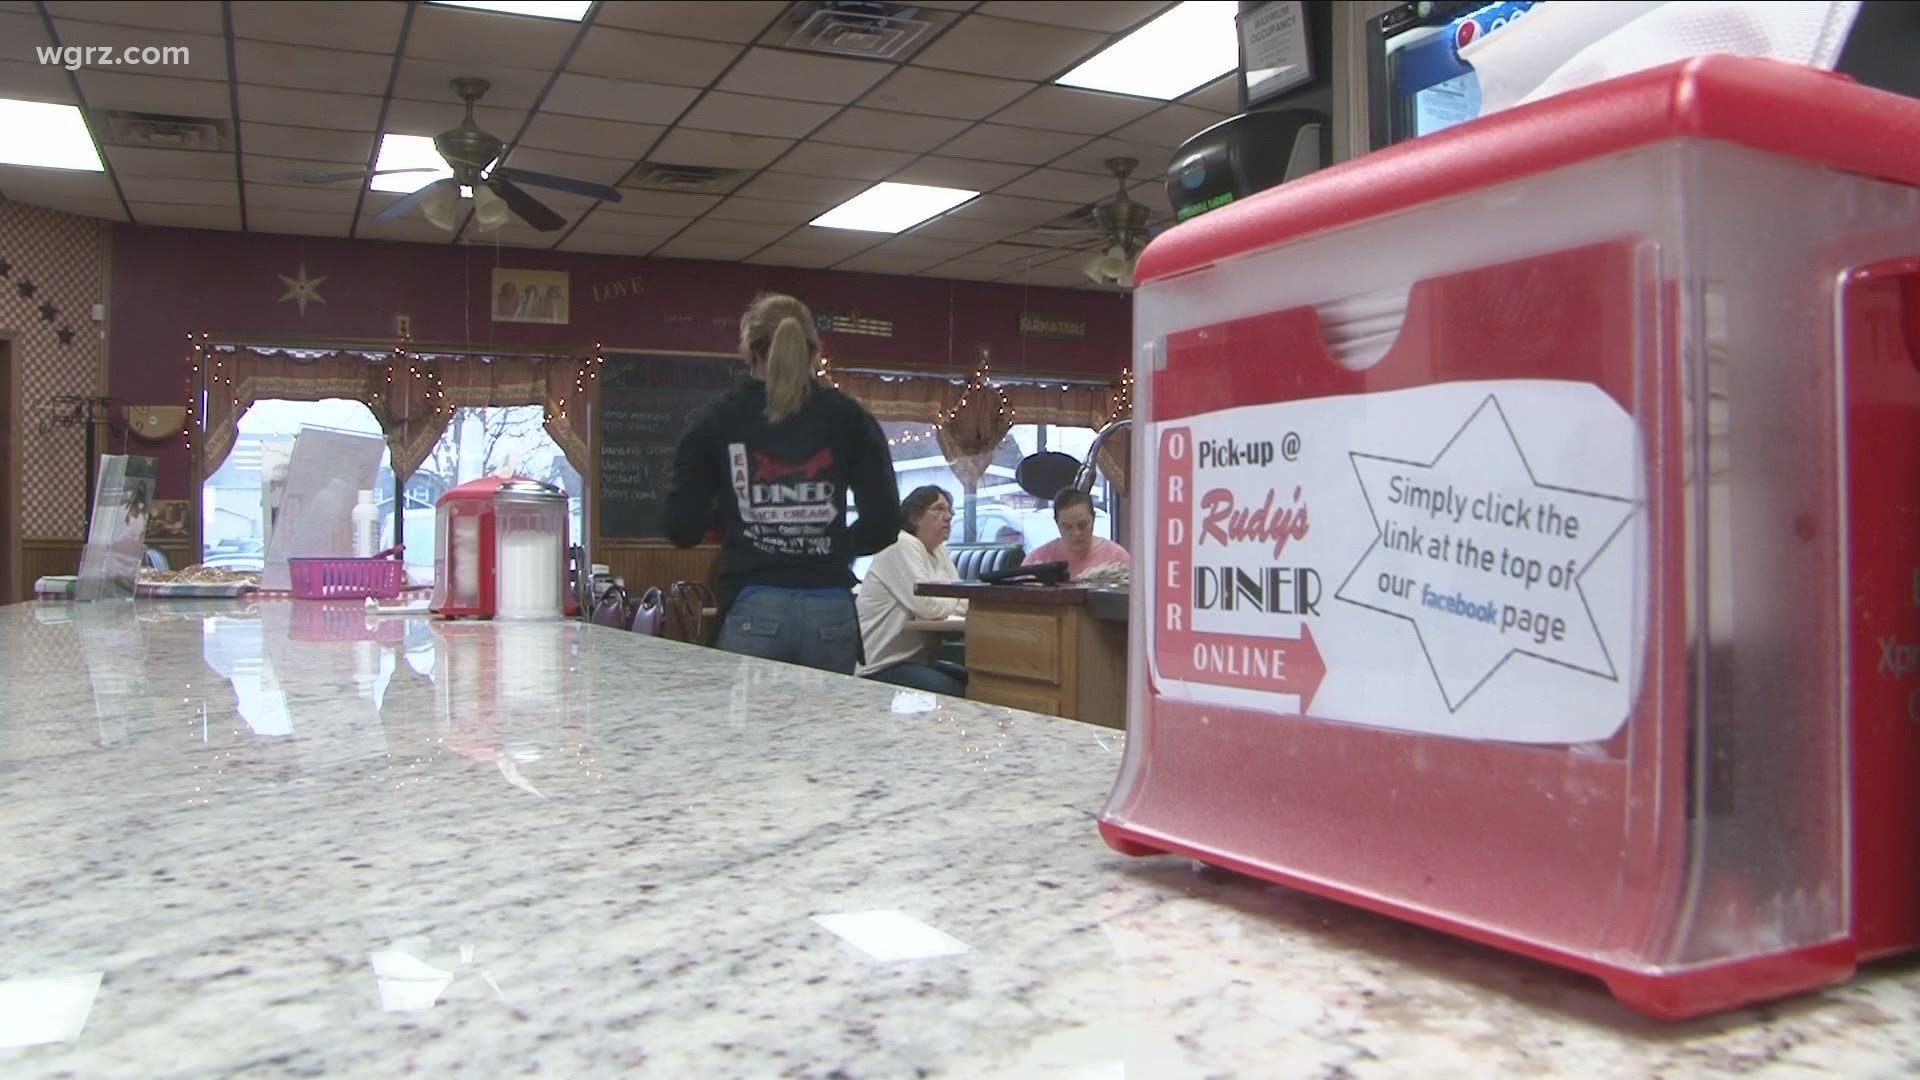 The restaurant has donated money to first responders, helped seniors and frontline workers during the pandemic, and assisted other small businesses.